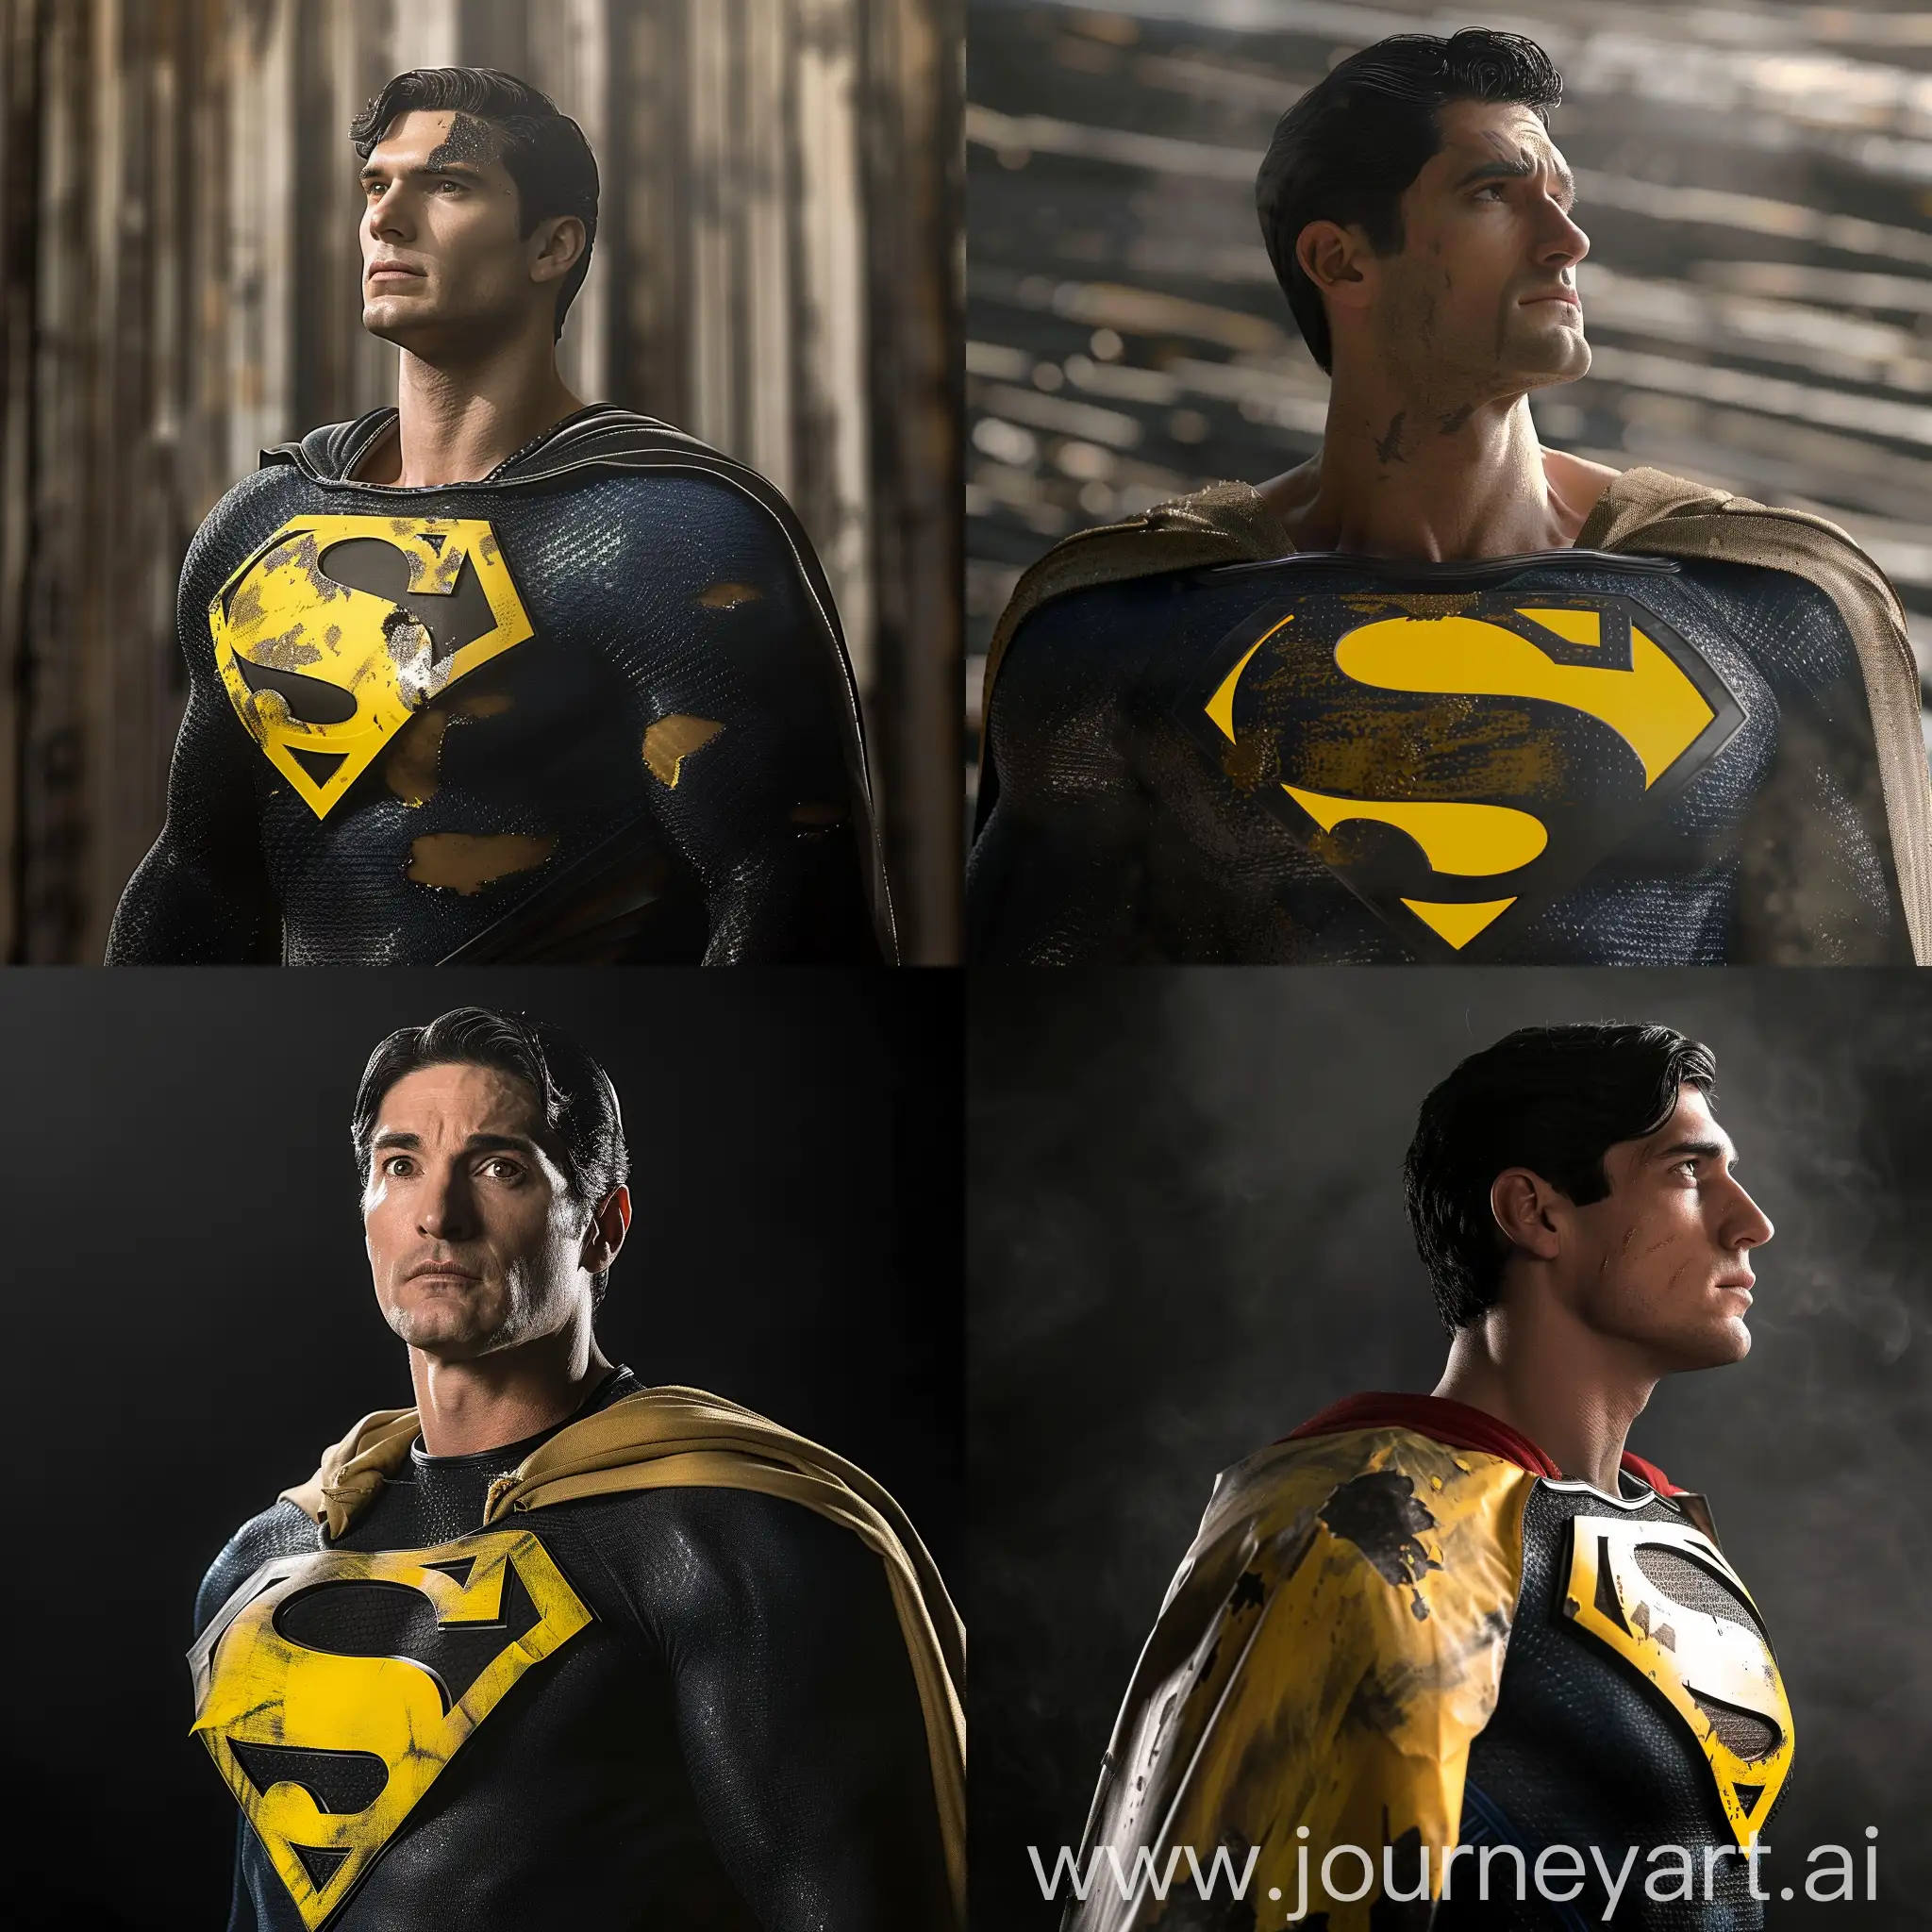 David Corenswet as superman with kingdom come suit with yellow replacing the black parts of the logo